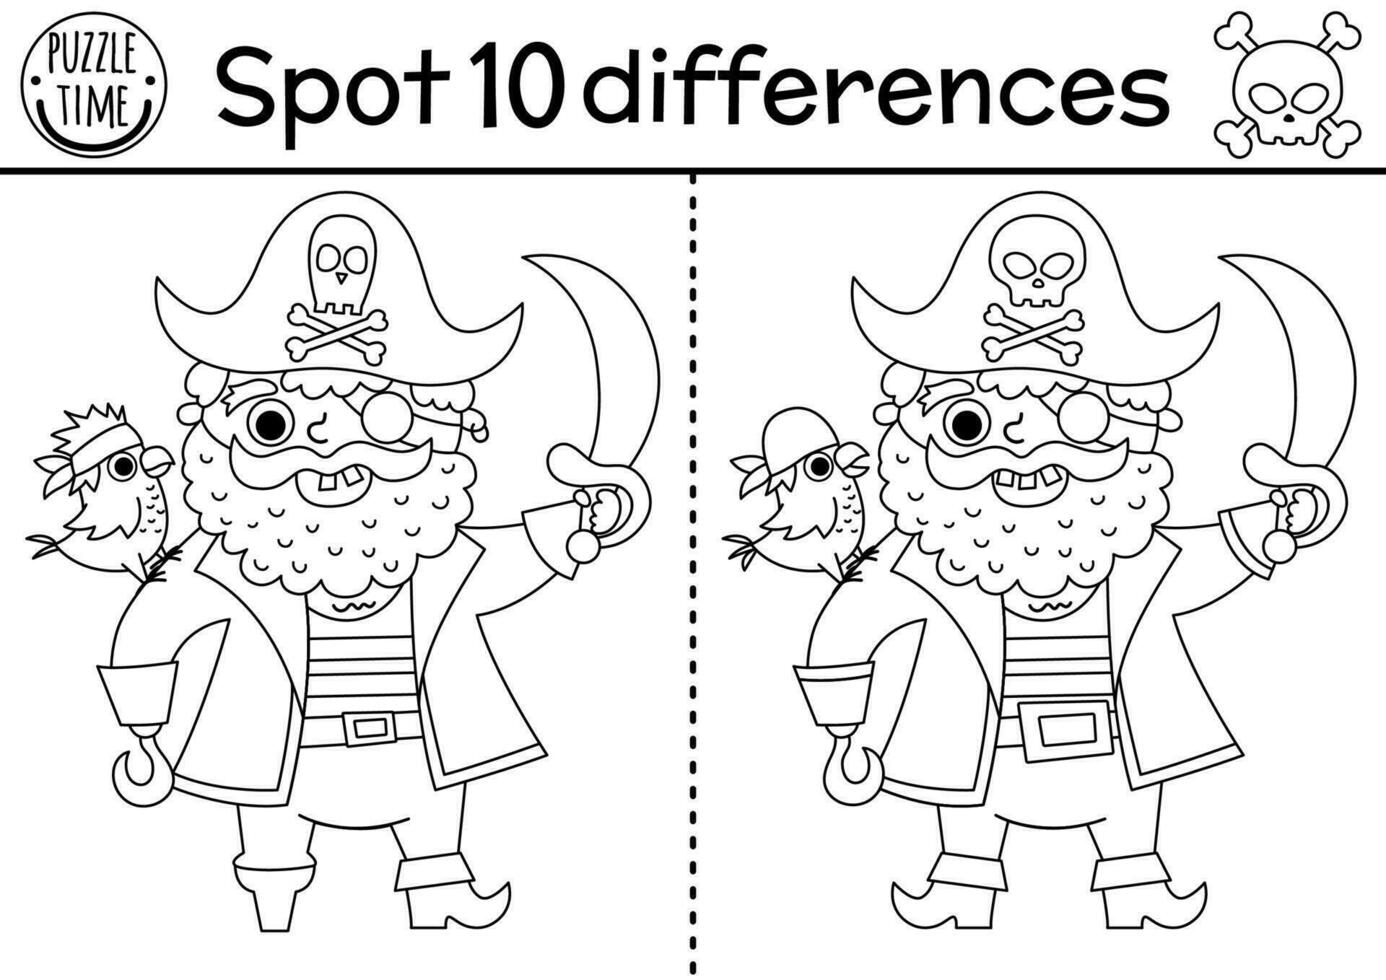 Black and white find differences game for children. Sea adventures line educational activity with cute pirate with parrot and sable. Treasure island printable worksheet, coloring page for kids vector